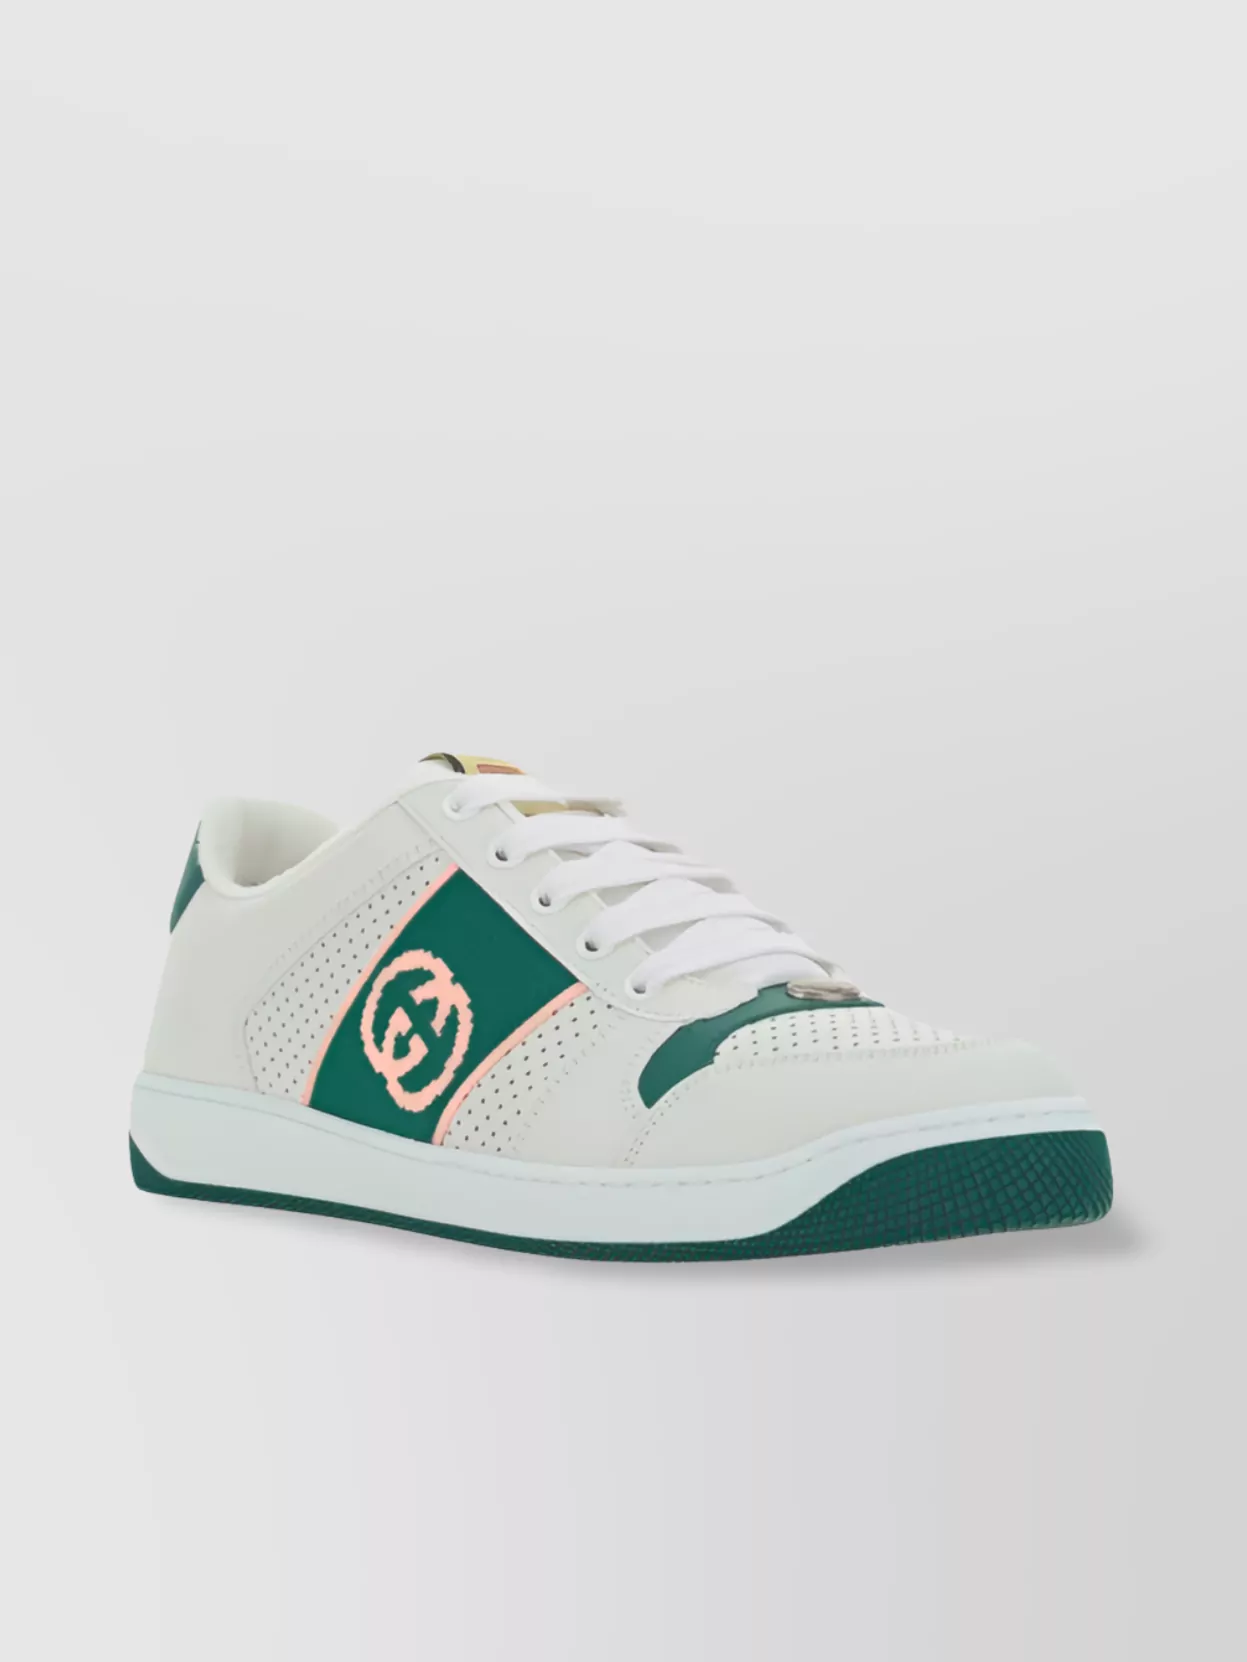 Gucci Round Toe Flat Sole Sneakers In White